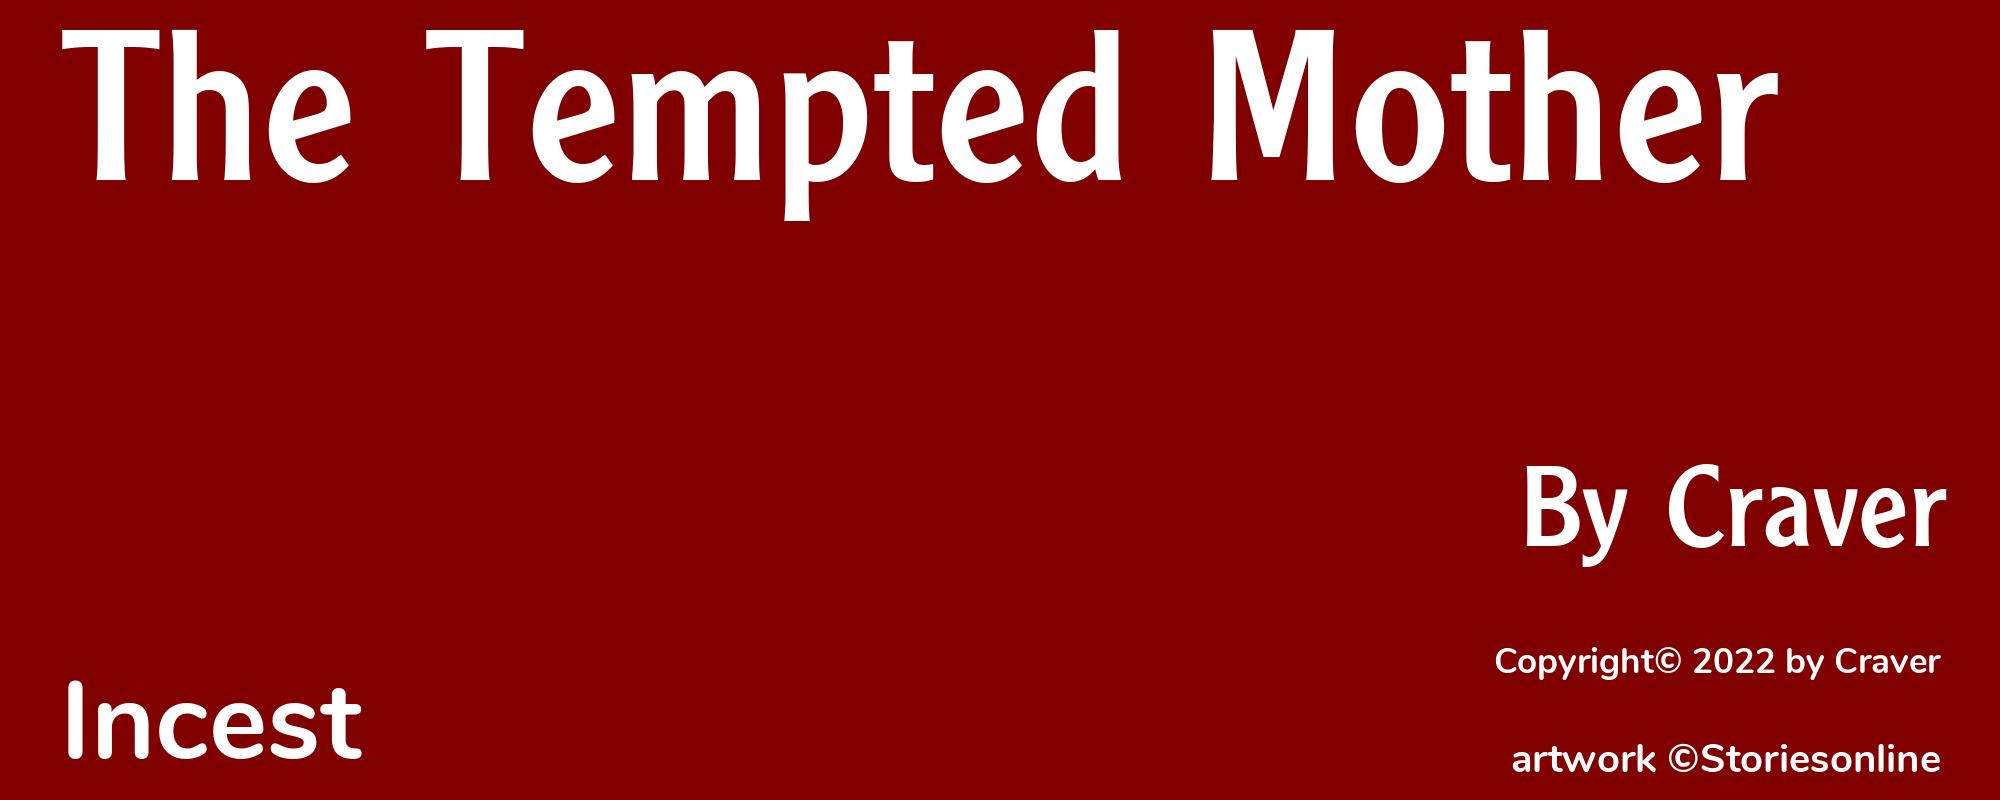 The Tempted Mother - Cover